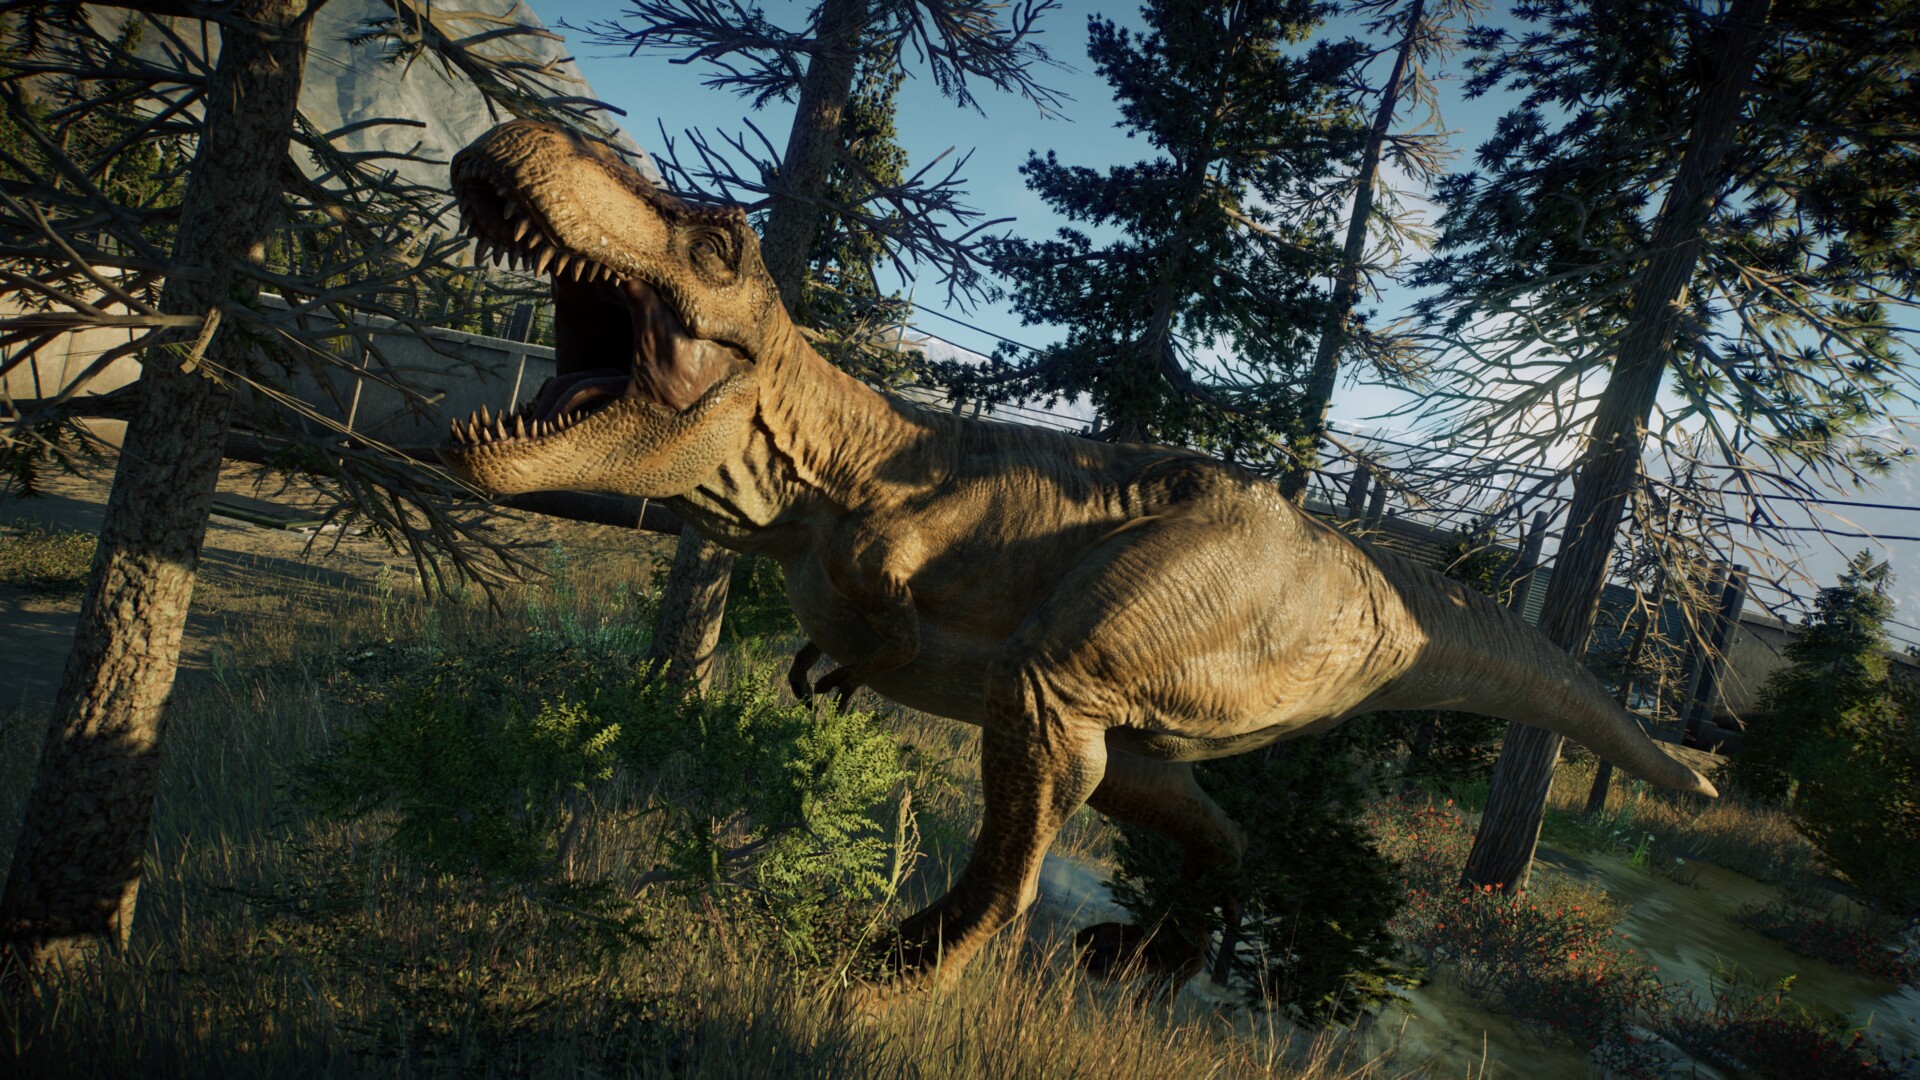 Jurassic World Evolution 2 - A T. rex hunts her prey, completely unaware  that a rival has broken through a recently opened gap in the fence. Chaos  is sure to ensue in